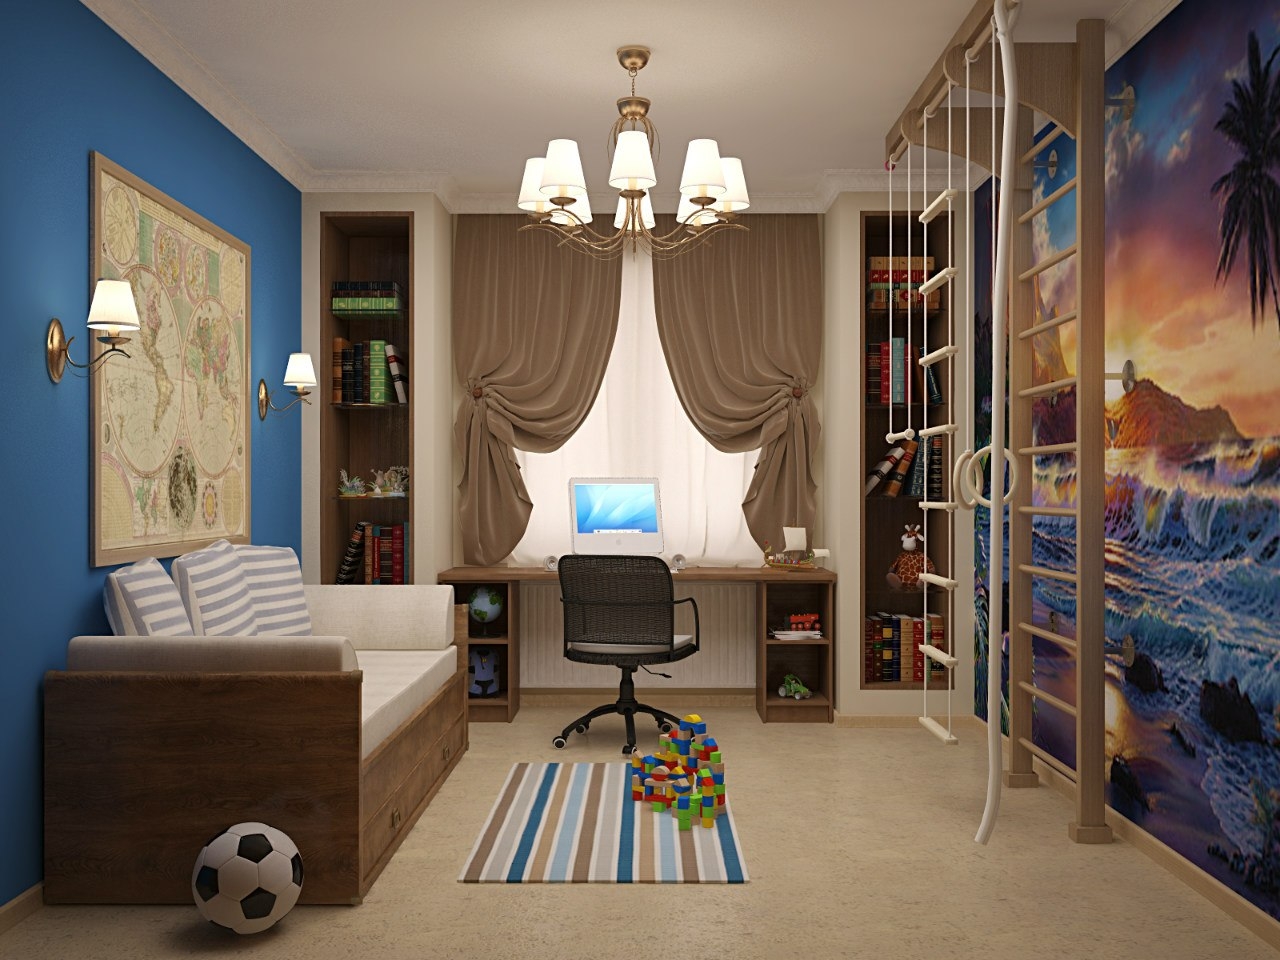 Design a room for a child in 2018